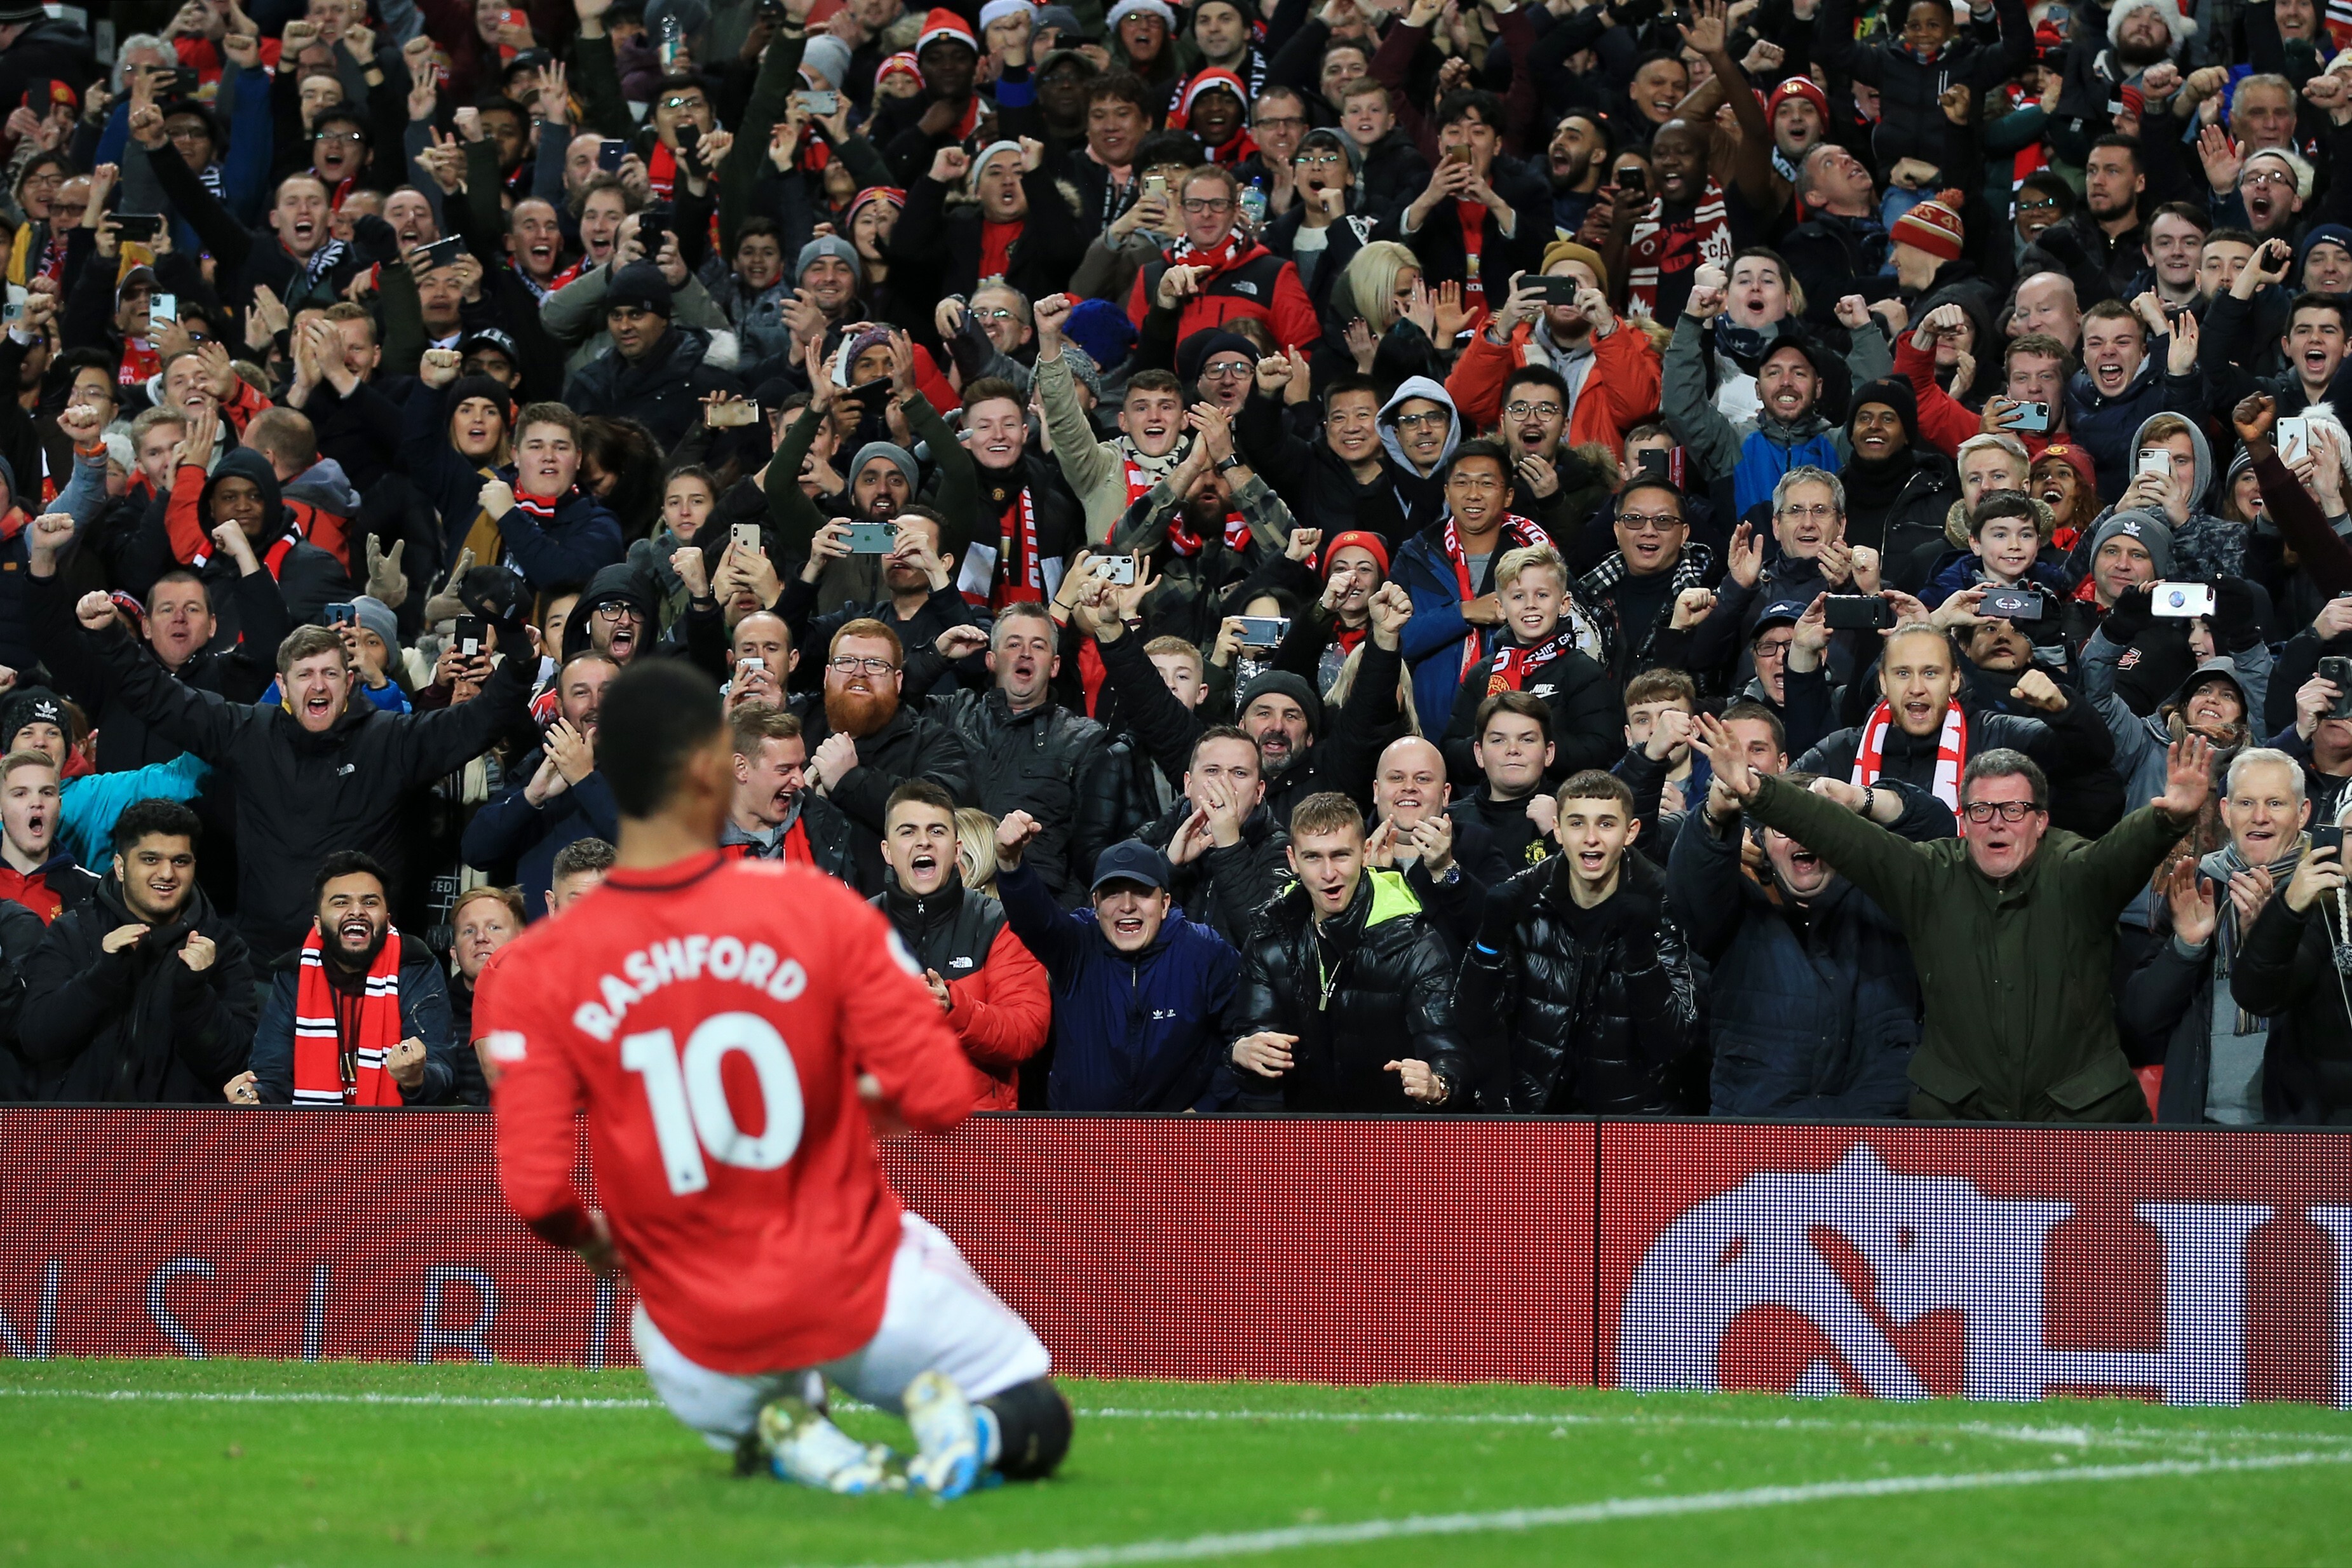 Fans cheer as Marcus Rashford celebrates scoring for Manchester United in the English Premier League match against Newcastle United at Old Trafford on December 26, 2019. Photo: Getty Images